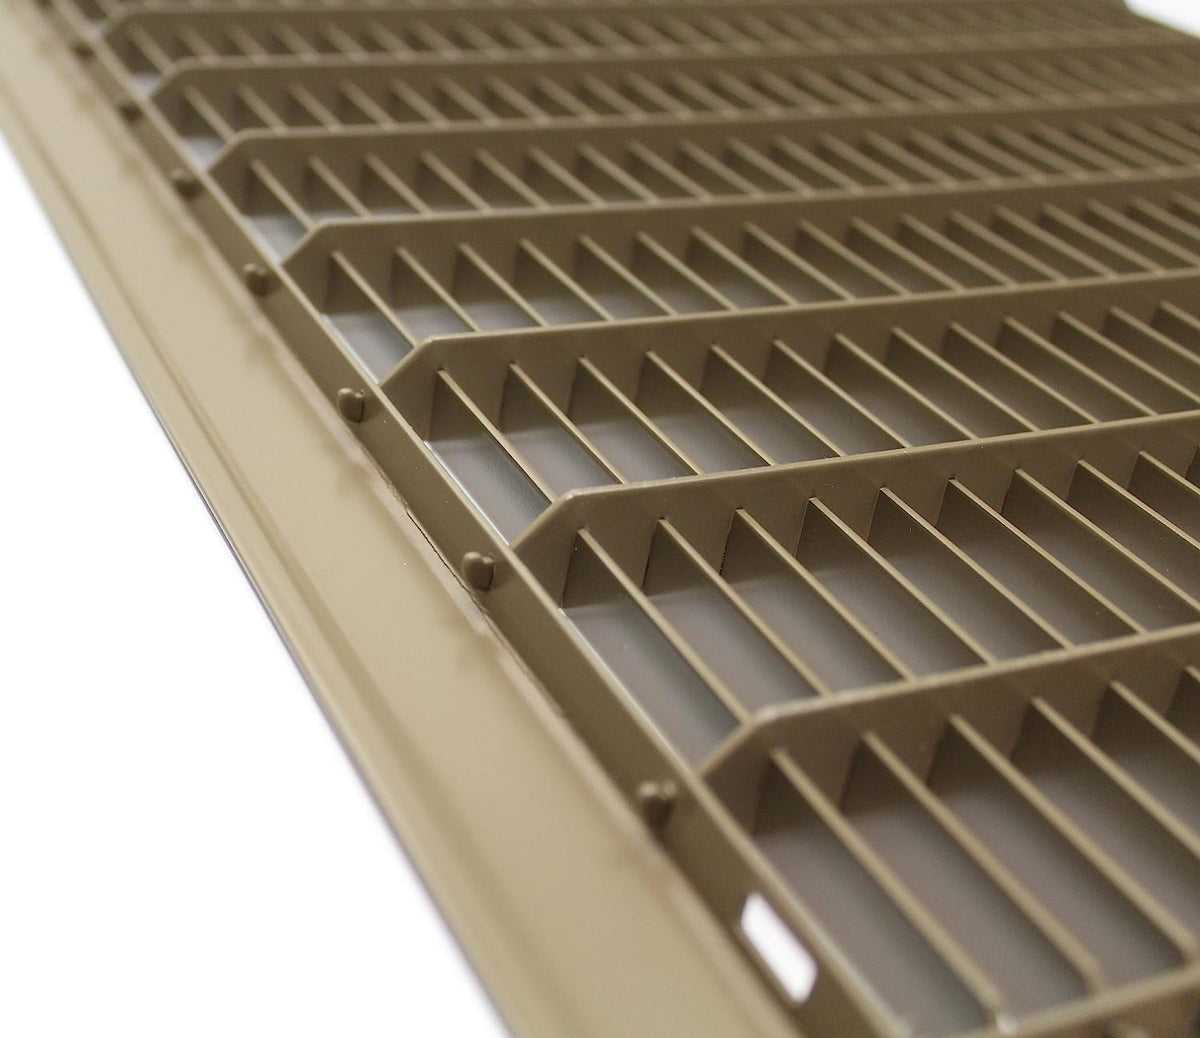 18&quot; X 30&quot; Or 30&quot; X 18&quot; Heavy Duty Floor Grille - Fixed Blades Air Grille - Brown [Outer Dimensions: 19.75 X 31.75]